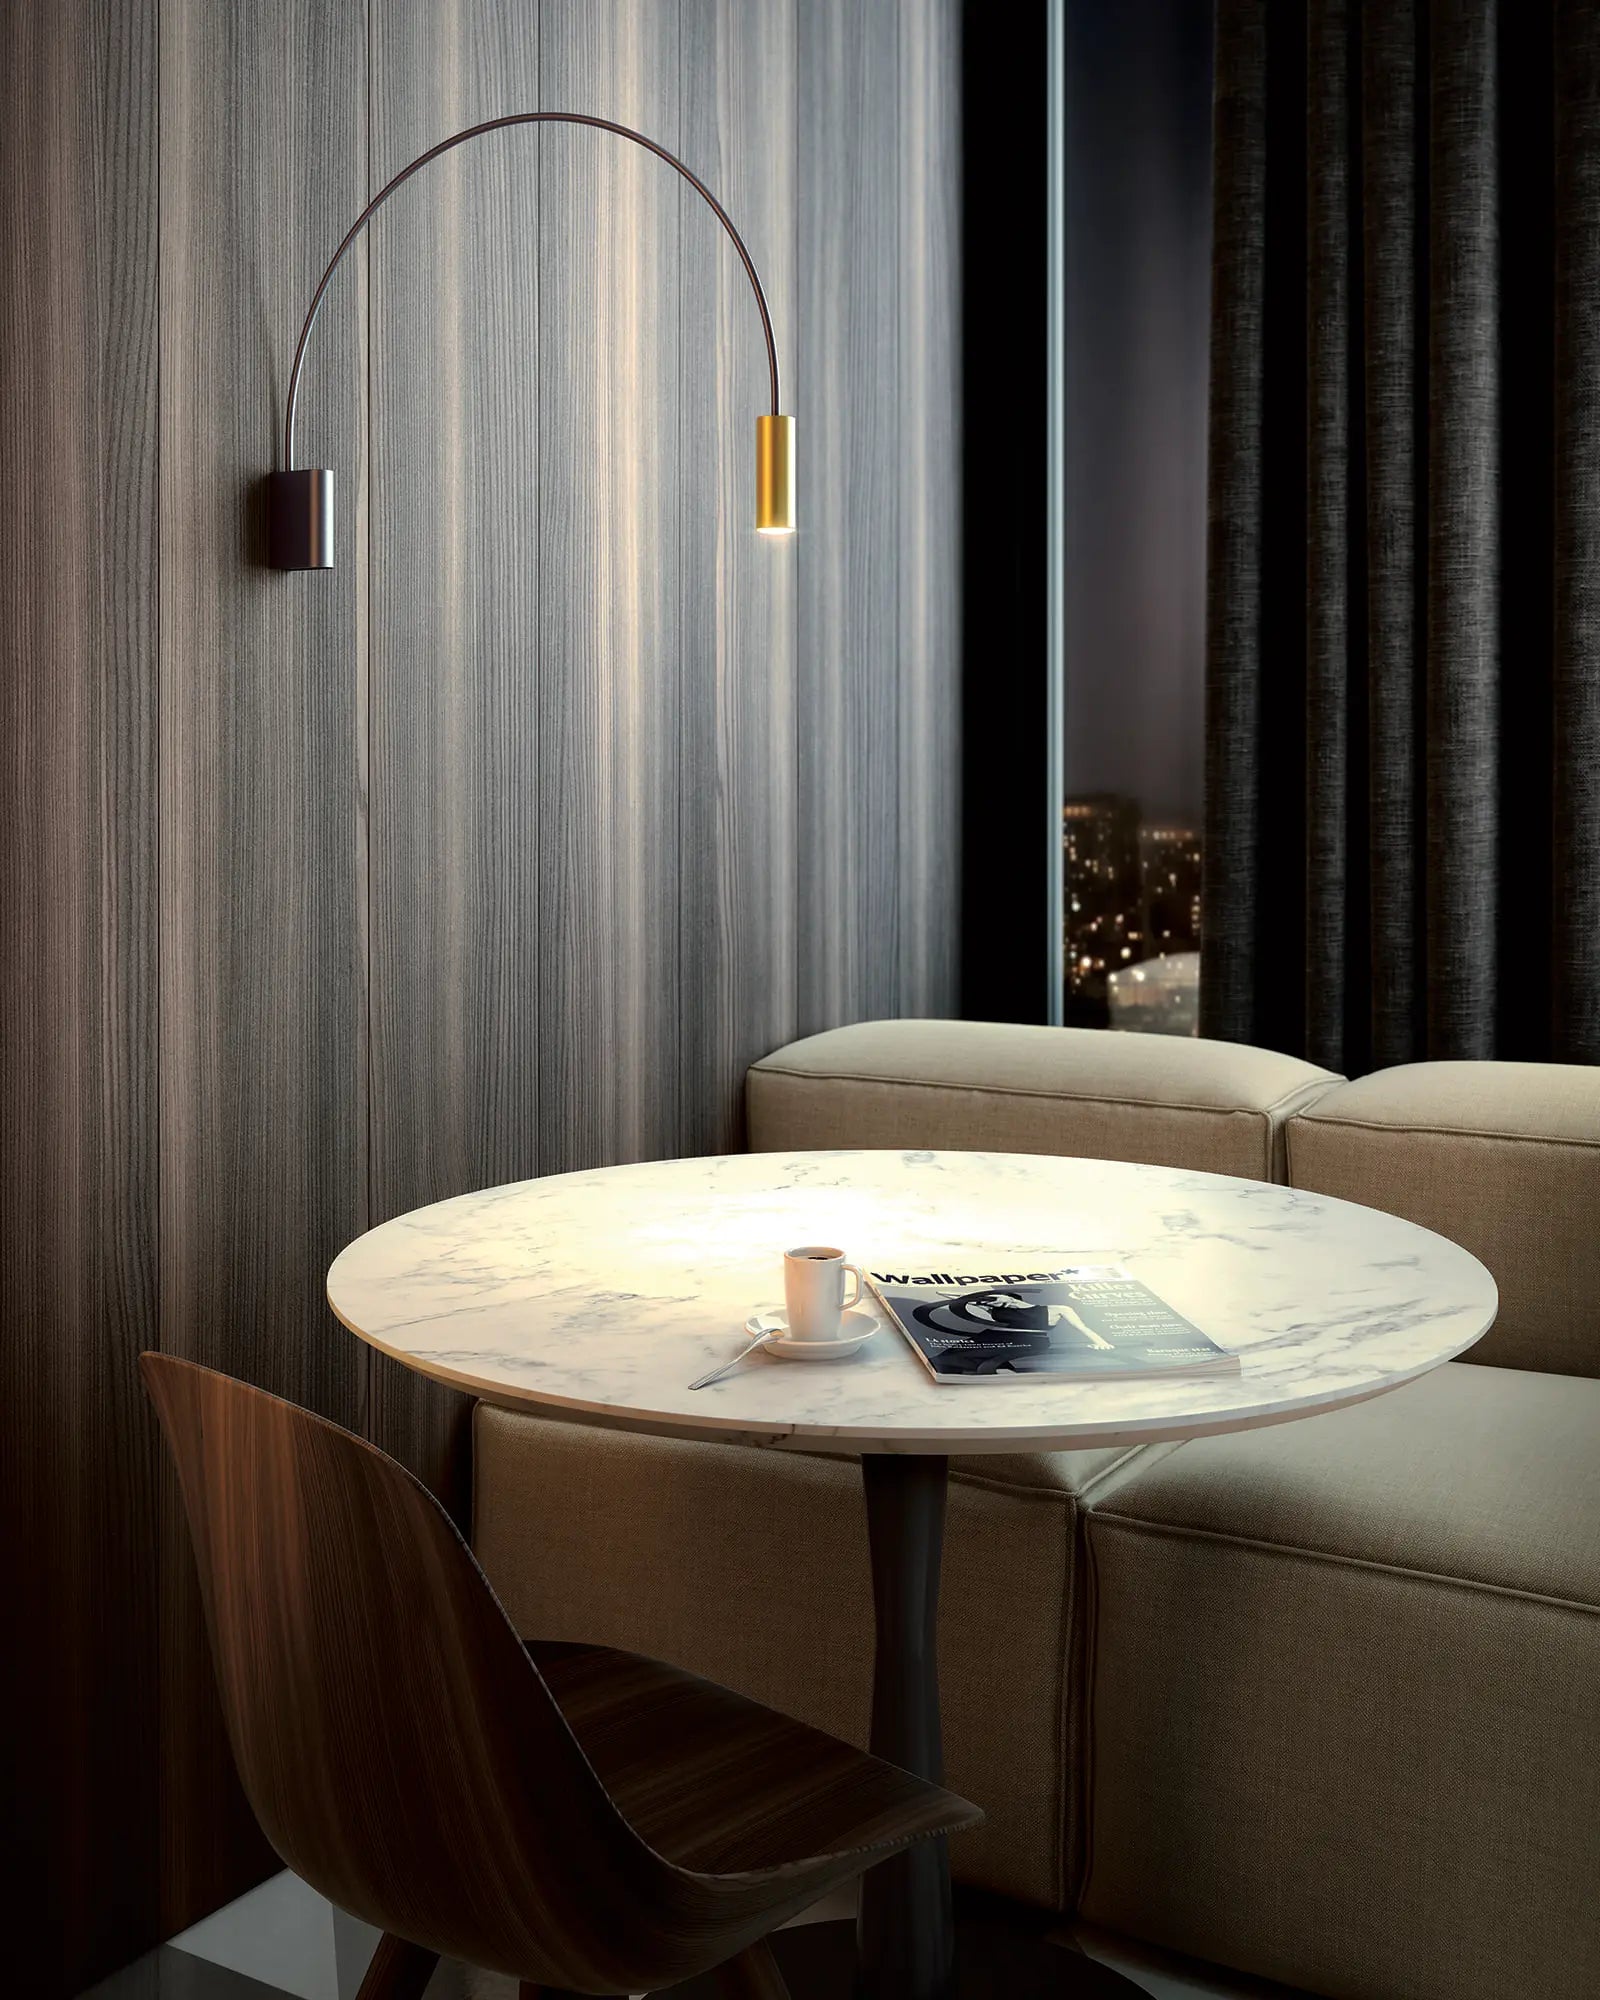 Volta wall light above a round table